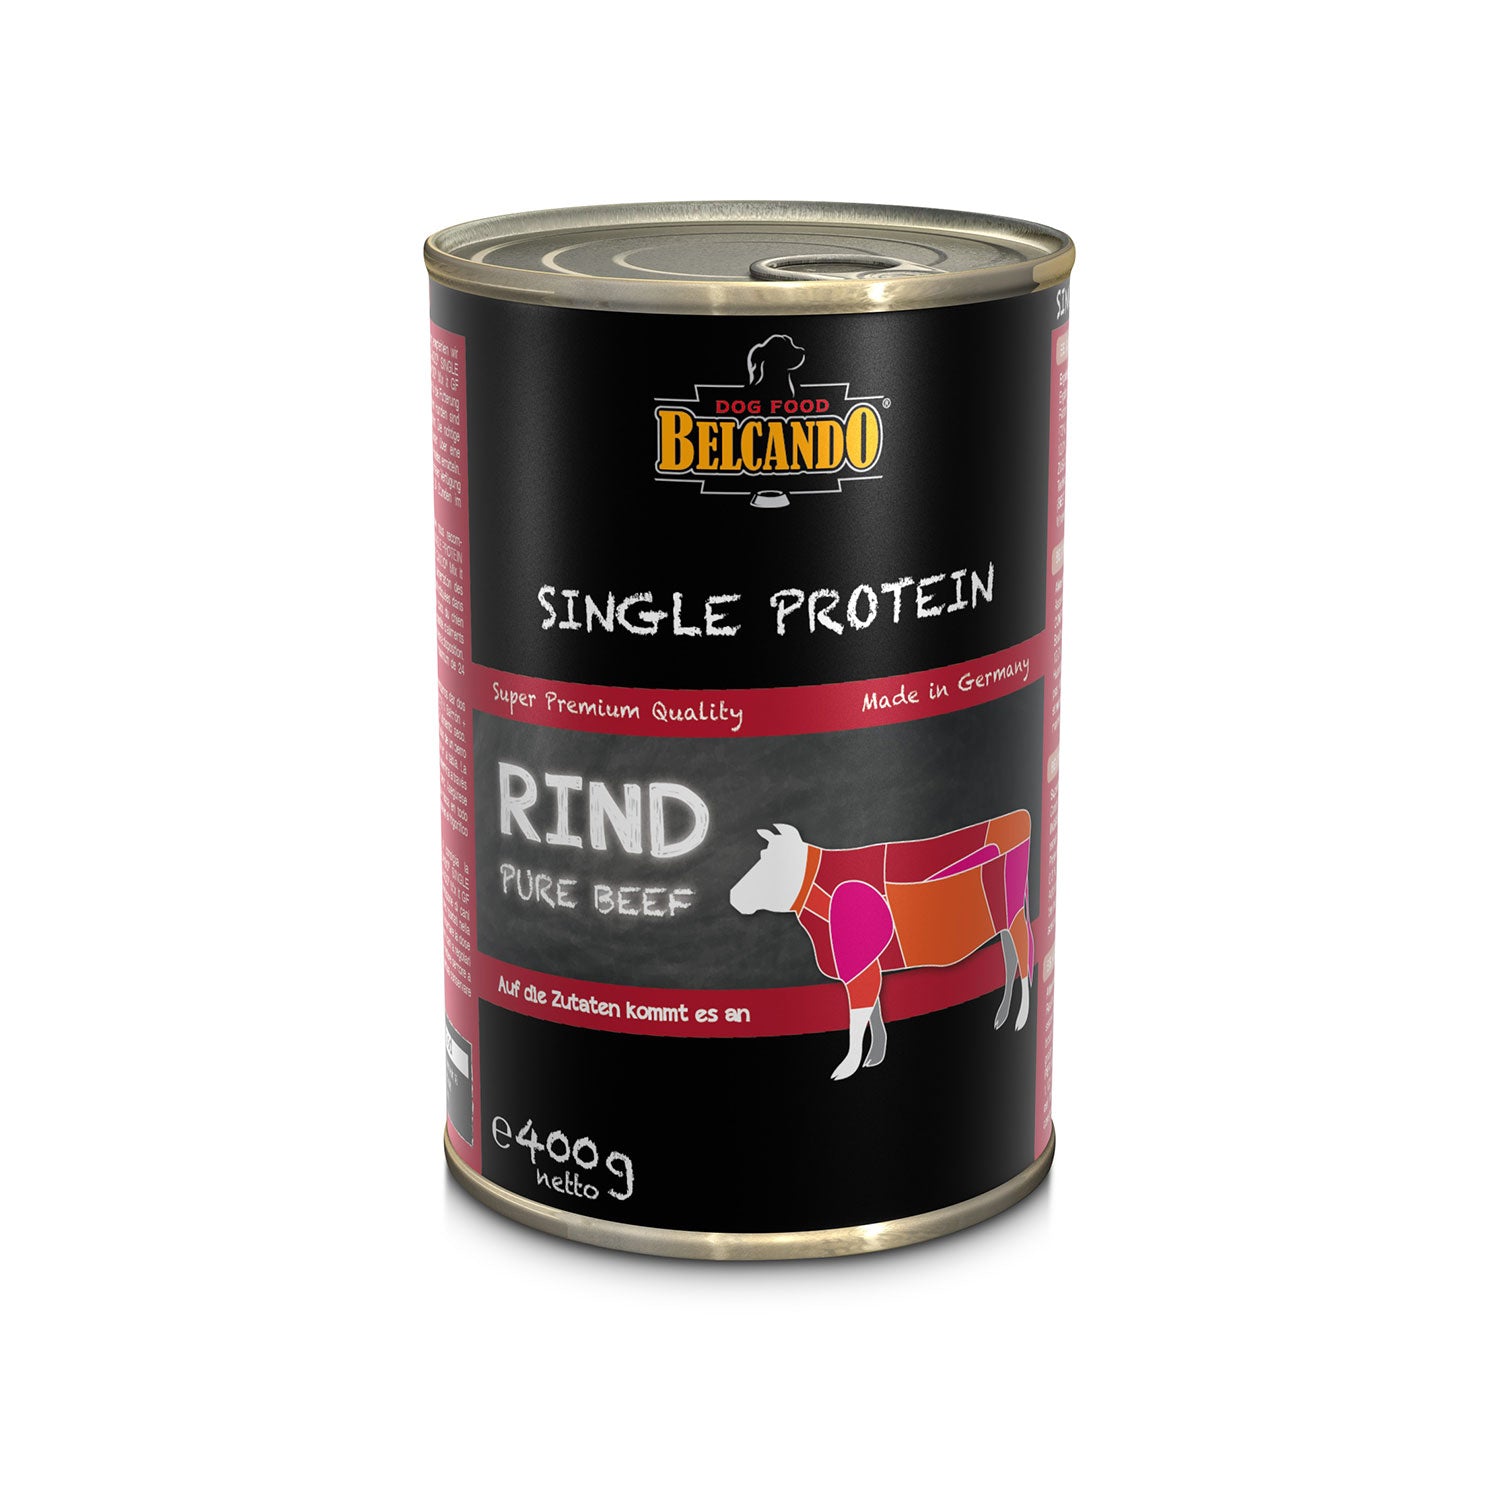 Single Protein Rind